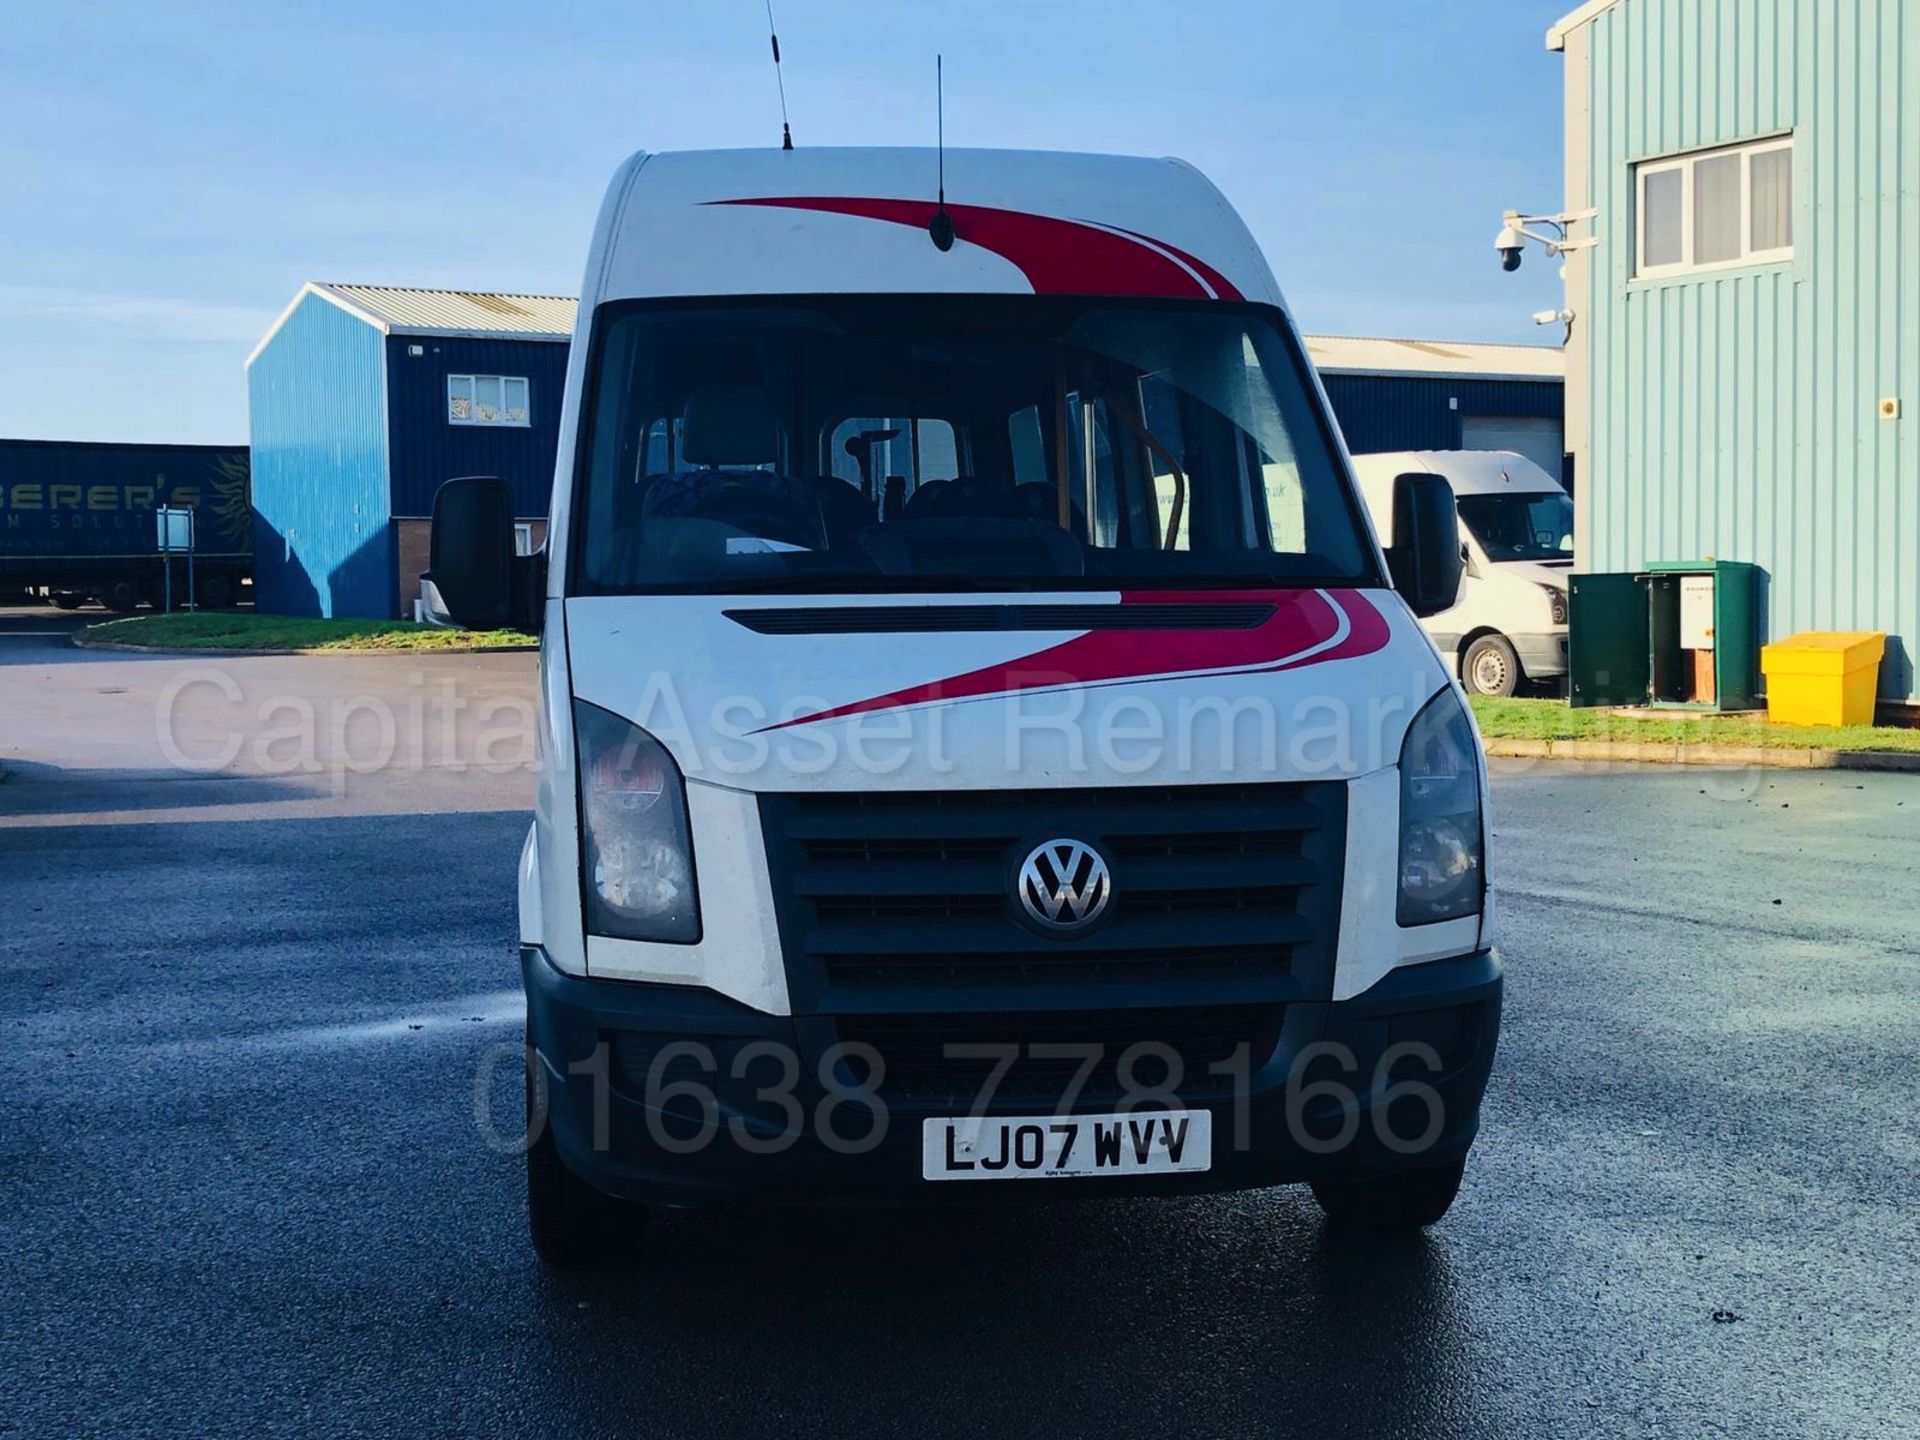 (On Sale) VOLKSWAGEN CRAFTER 2.5 TDI *LWB - 16 SEATER MINI-BUS* (2007) *ELECTRIC WHEEL CHAIR LIFT* - Image 12 of 35